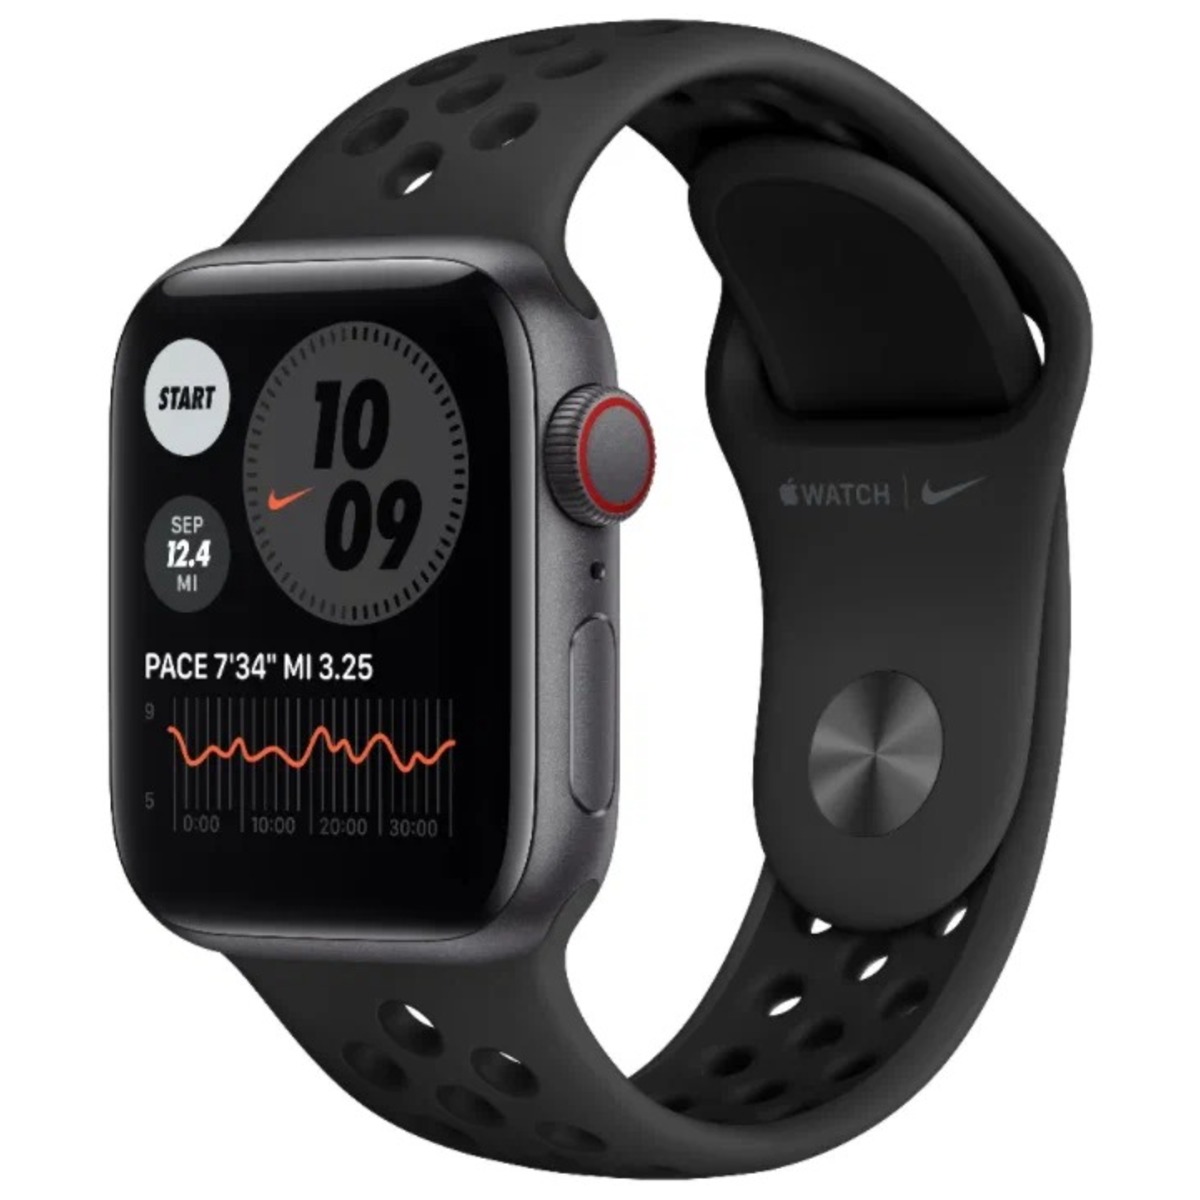 Apple Watch SE 44mm Aluminum Case with Nike Sport Band (Цвет: Space Gray/Anthracite/Black)